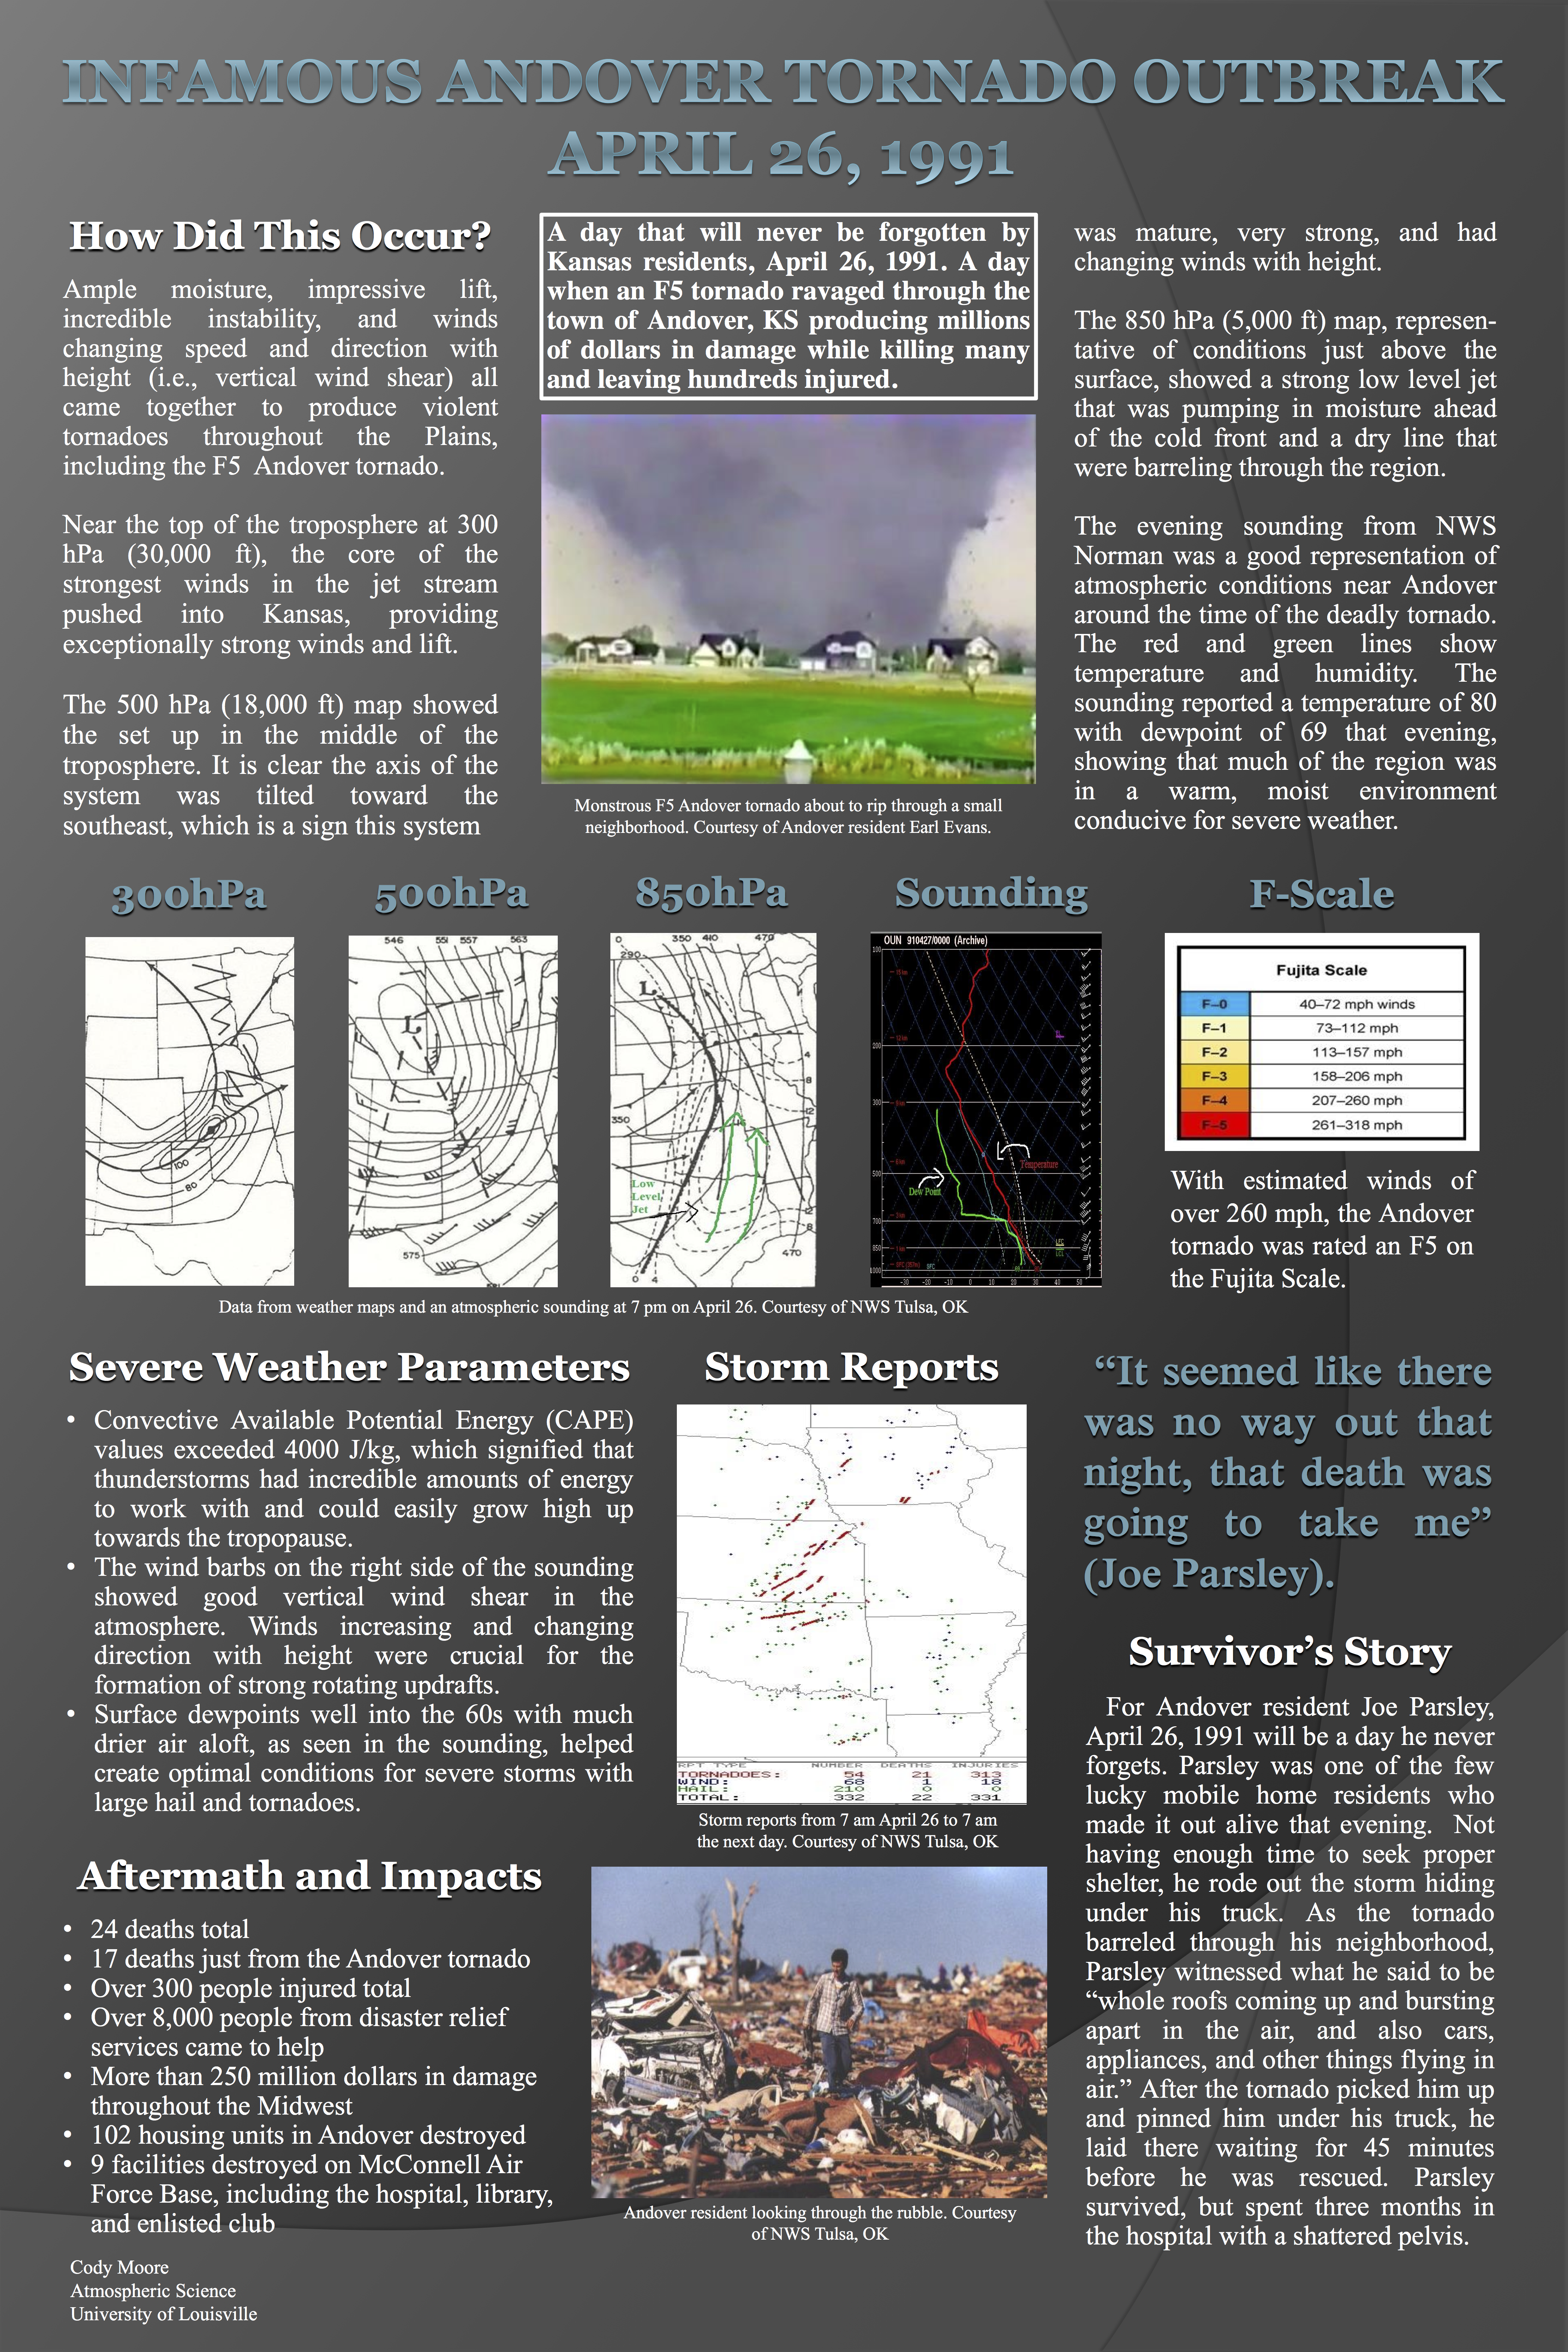 Poster by Cody Moore about Infamous Andover Tornado Outbreak April 26, 1991